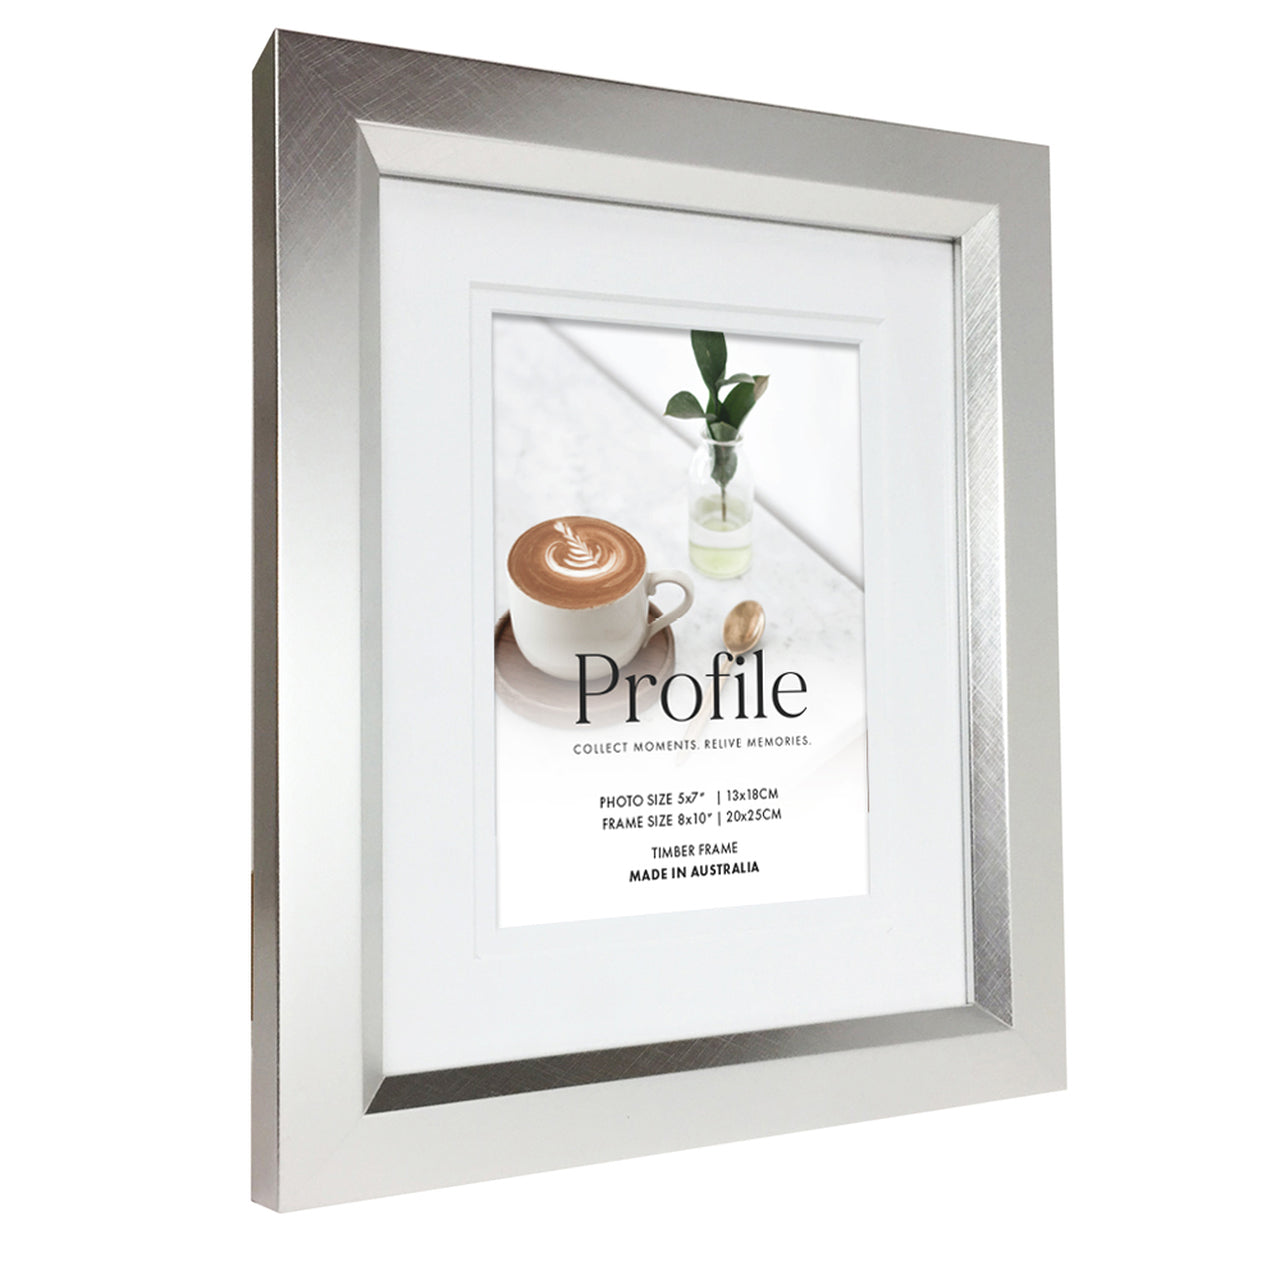 Soho Champagne 16x20 Photo Frame with 11x14 opening